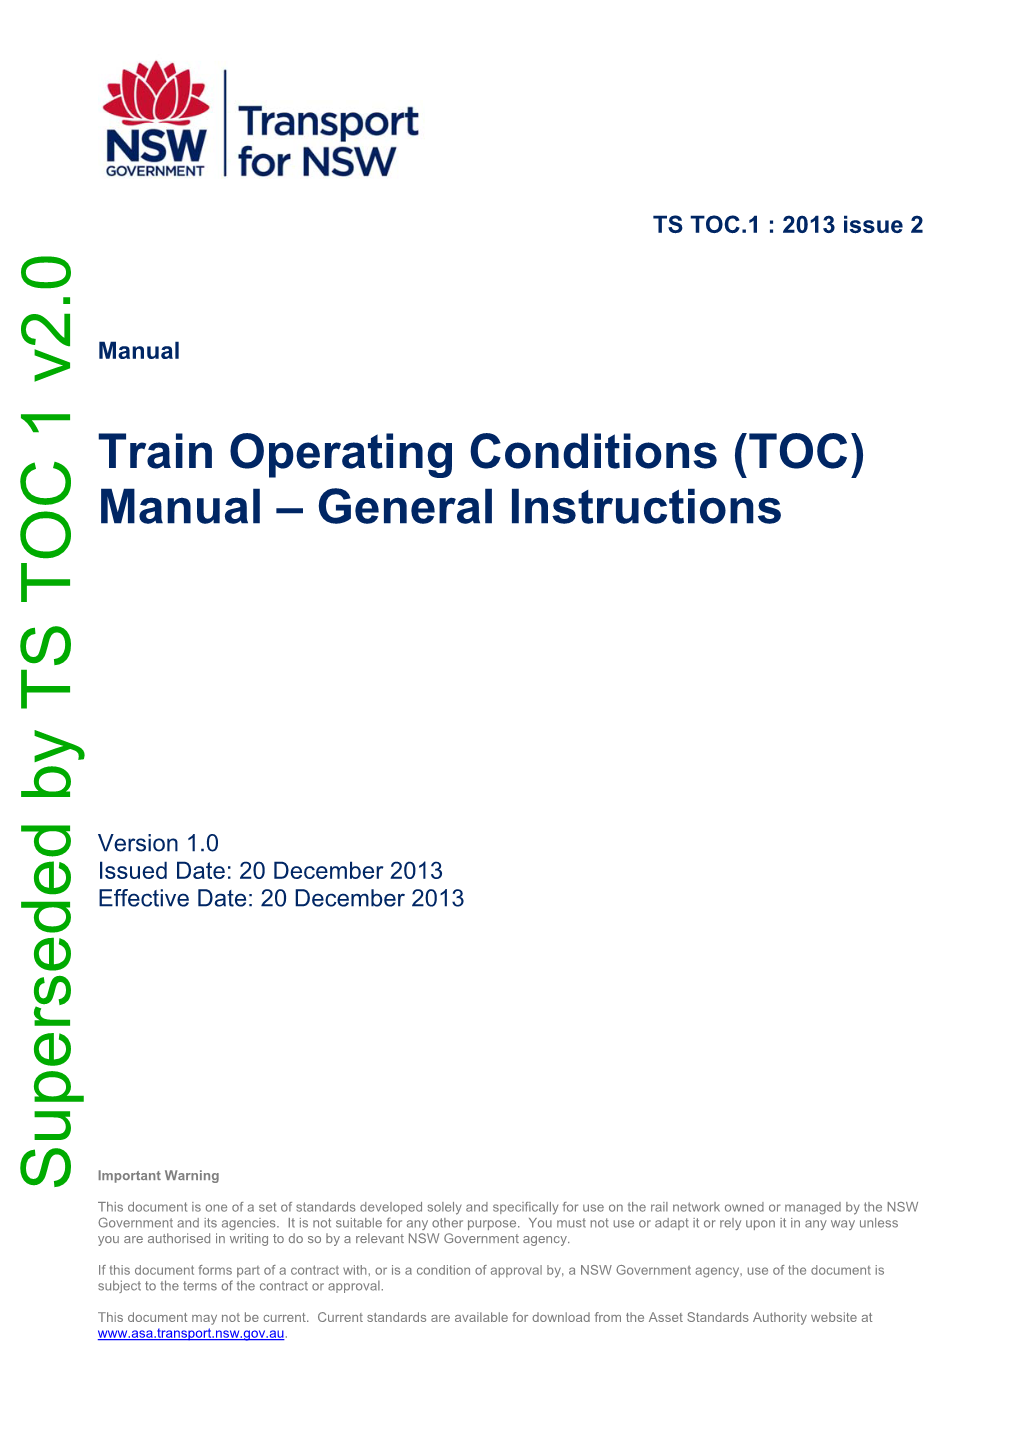 TS-TOC Train Operating Conditions Manual